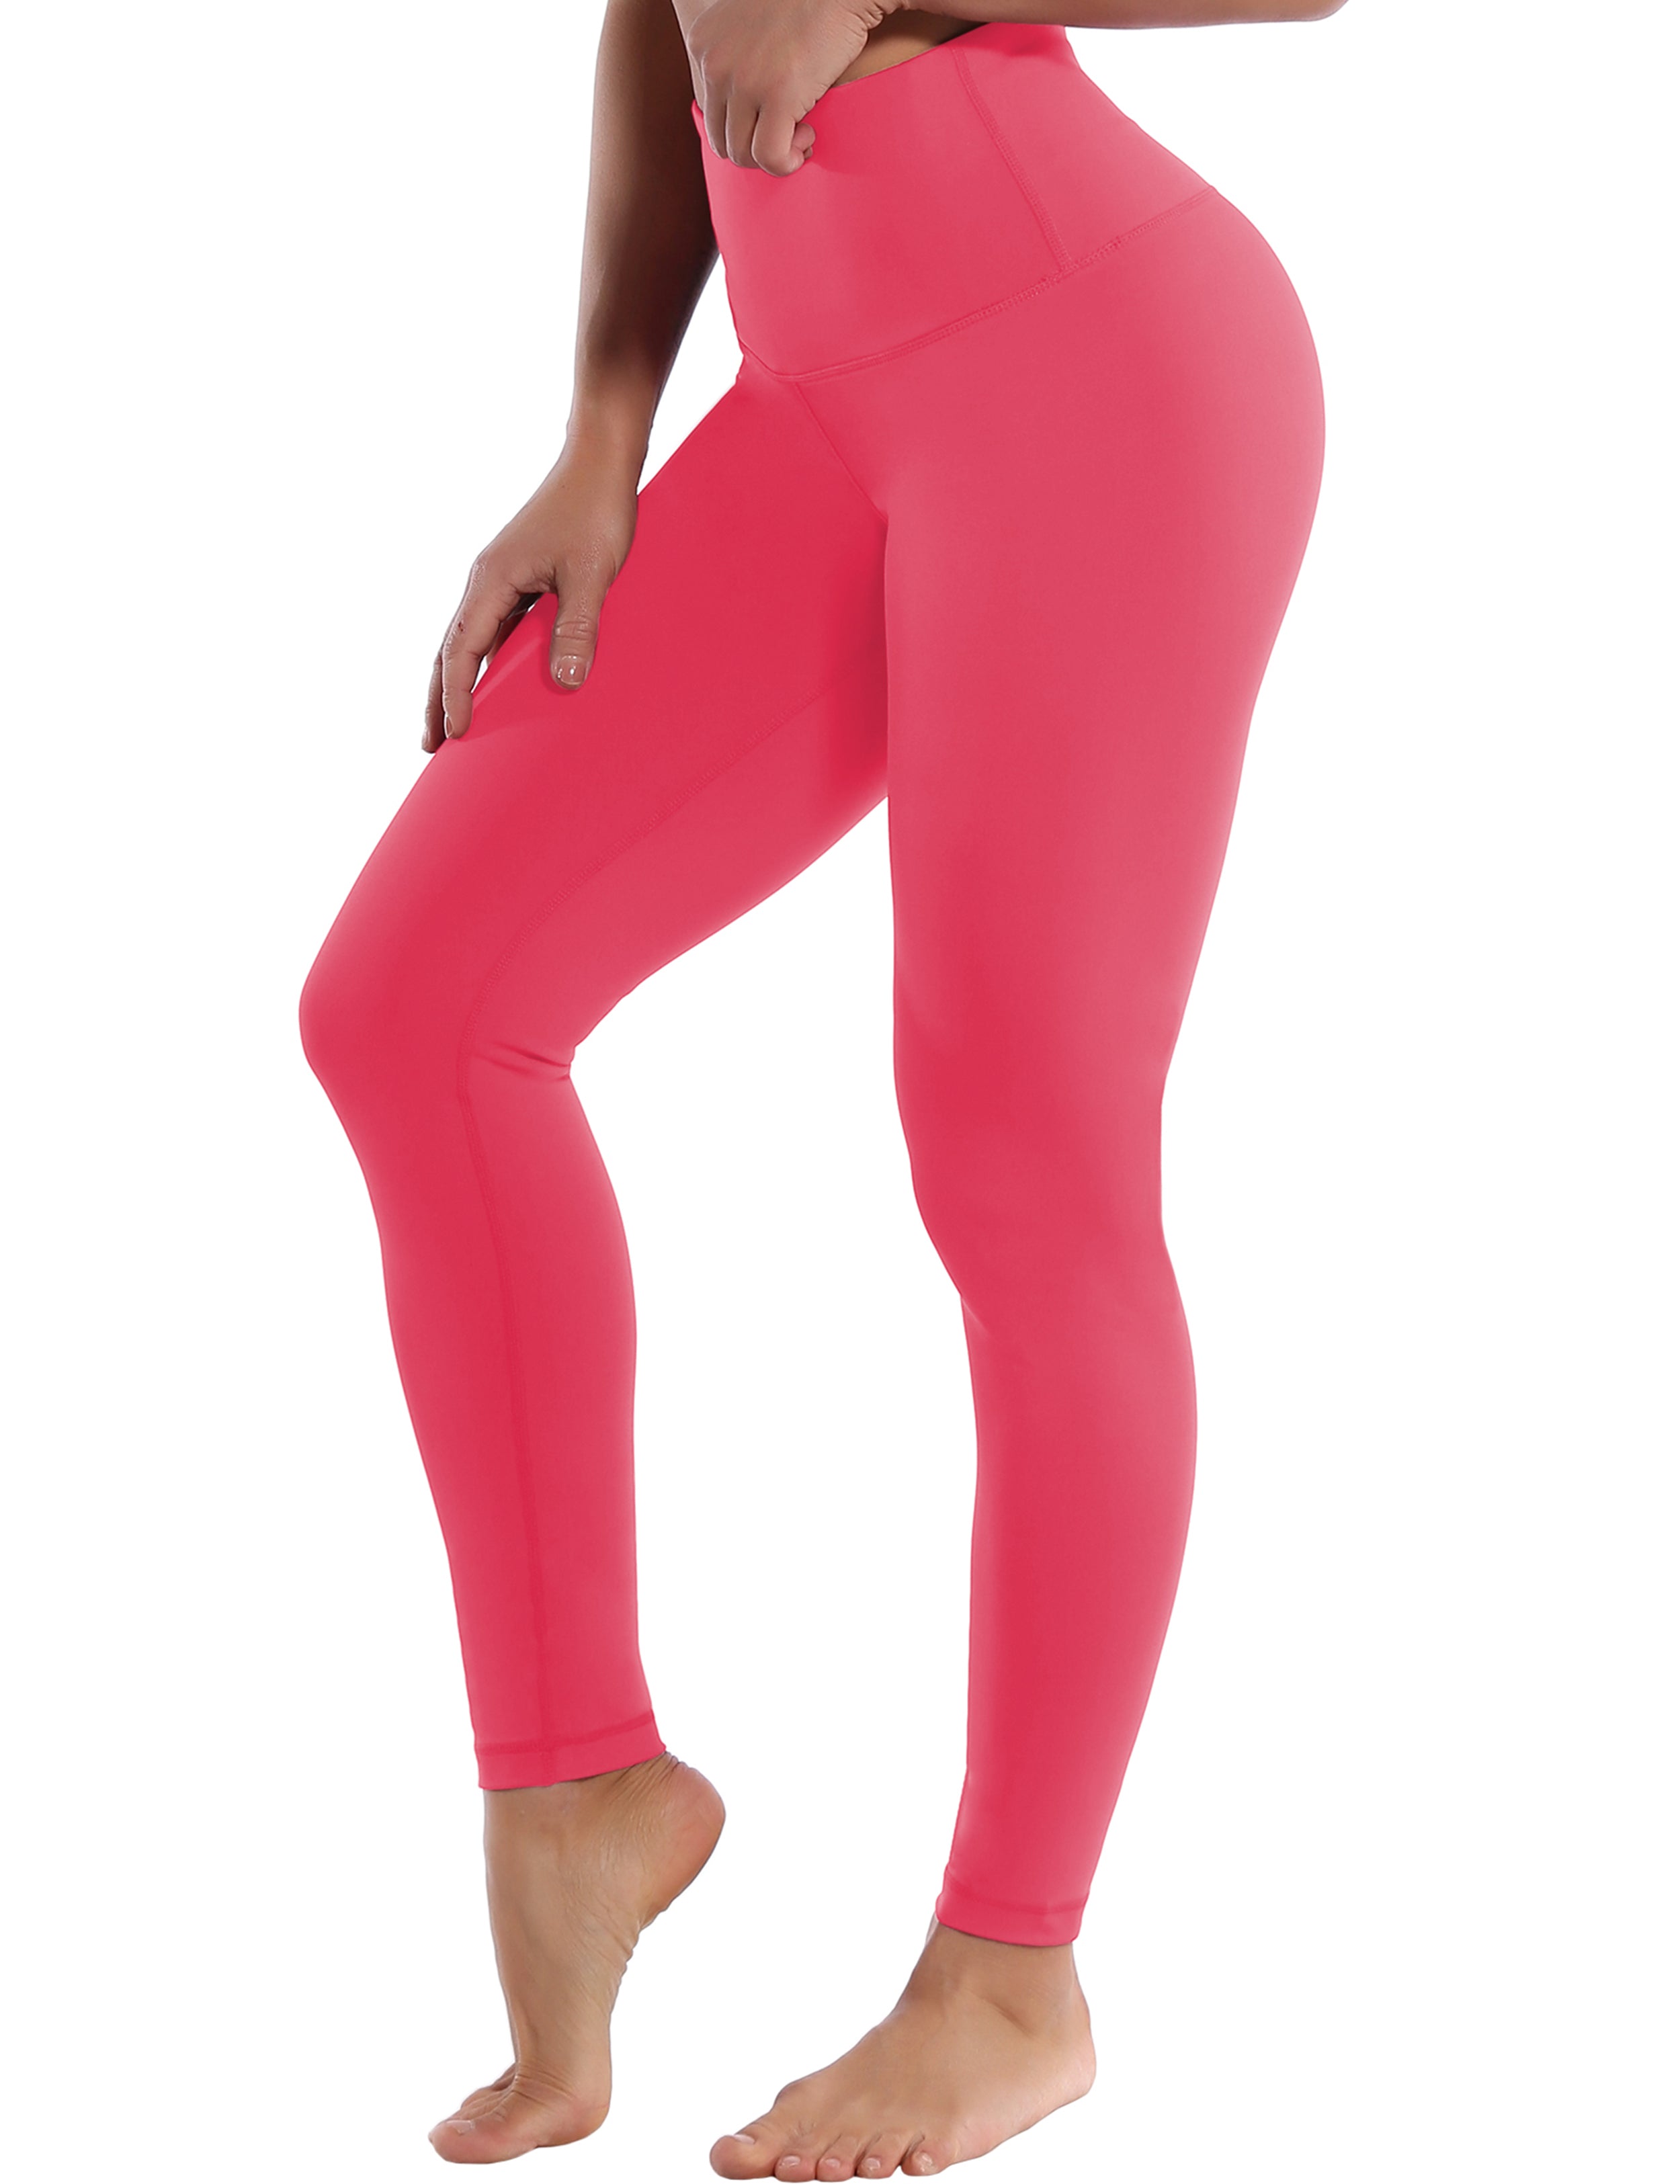 High Waist Golf Pants rosecoral 75%Nylon/25%Spandex Fabric doesn't attract lint easily 4-way stretch No see-through Moisture-wicking Tummy control Inner pocket Four lengths